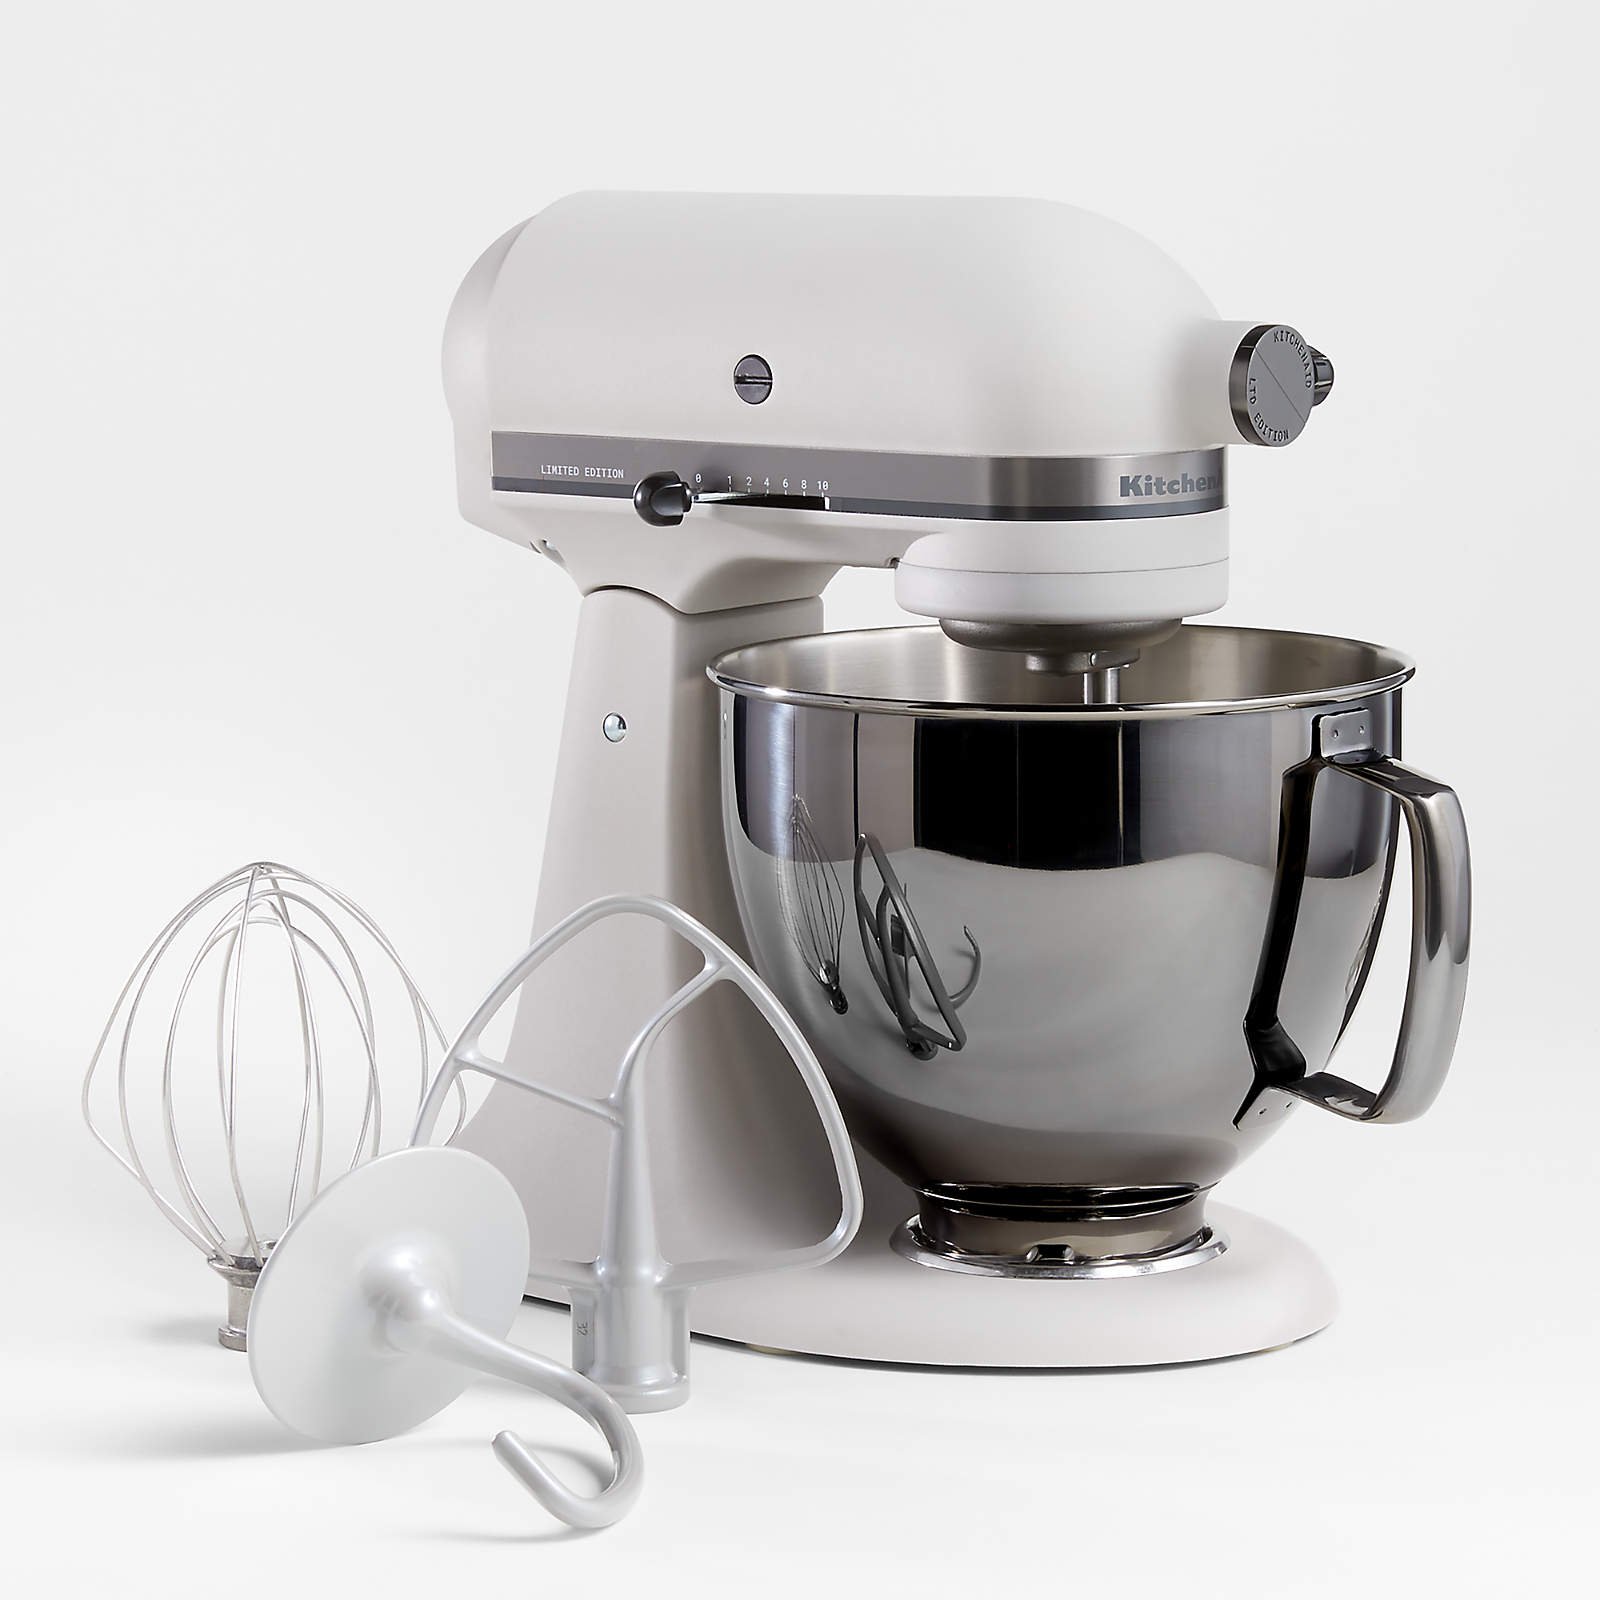 https://www.retail-kitchen.com/wp-content/uploads/2023/02/kitchenaid-artisan-series-5-quart-tilt-head-limited-edition-light-and-shadow-stand-mixer-with-black-stainless-steel-bowl.jpg